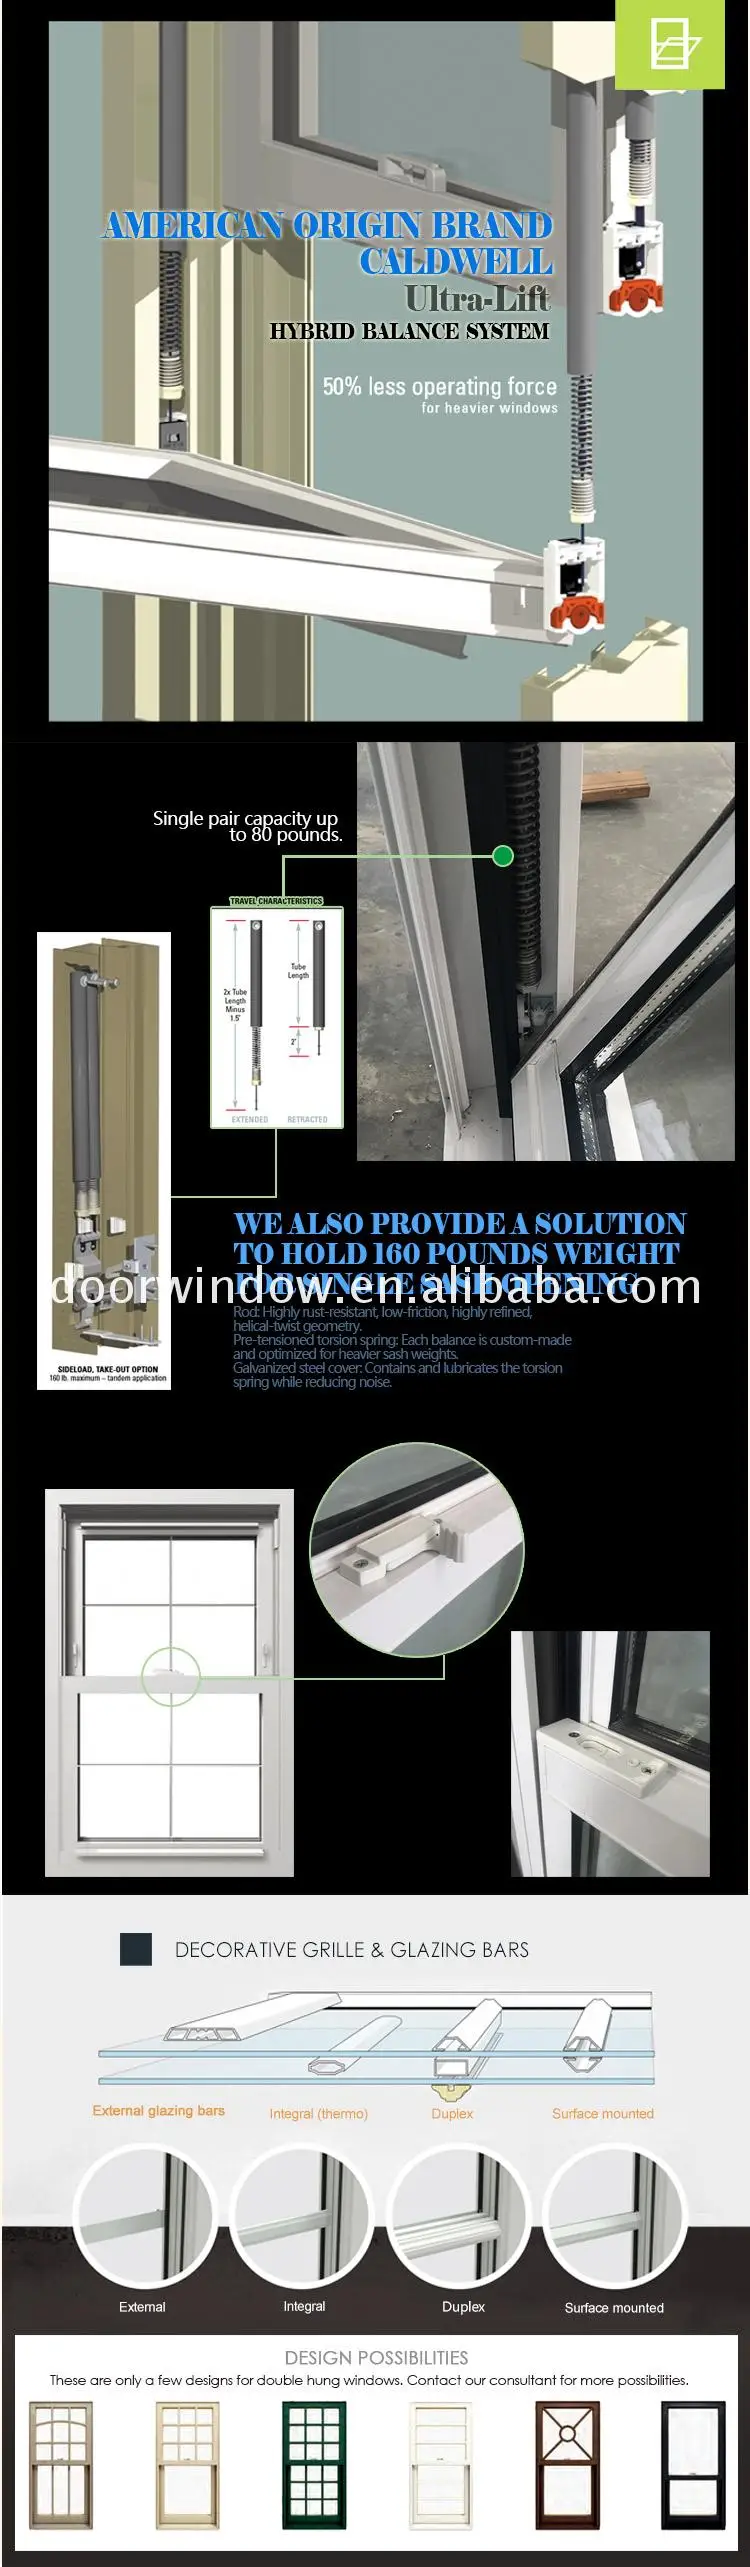 Top quality double hung window over kitchen sink double hung window locks ventilation manufacturers